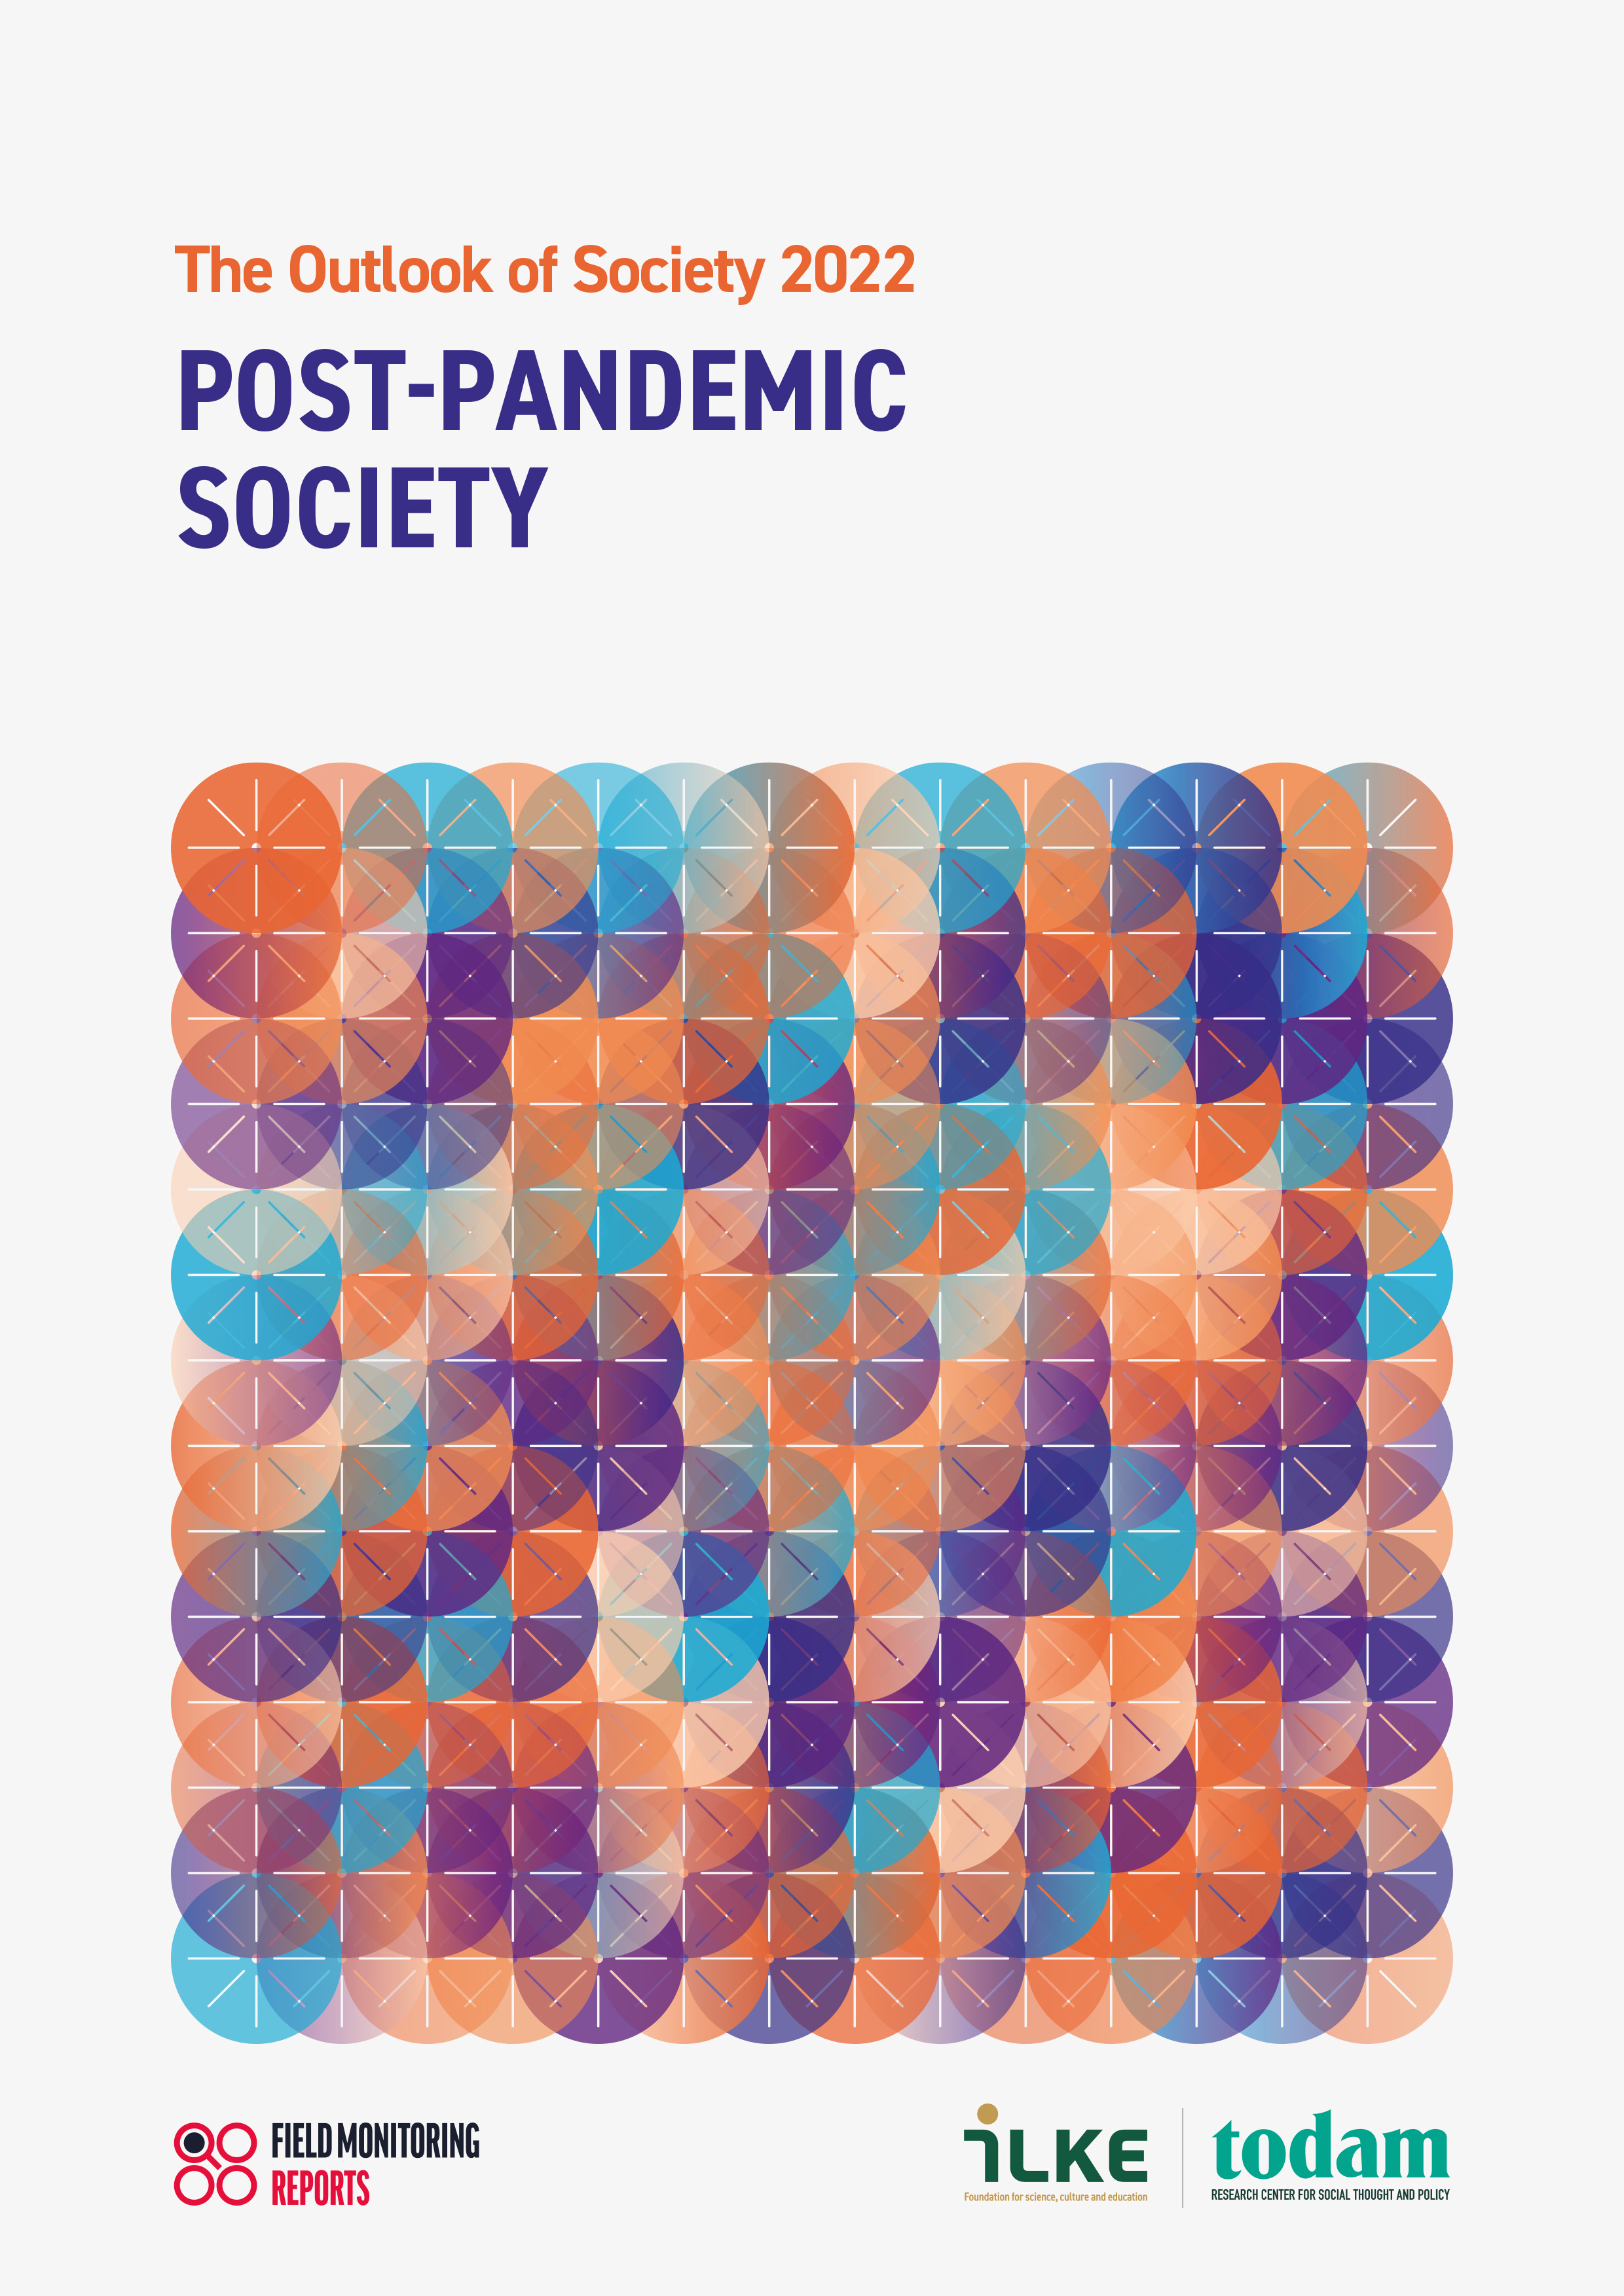 The Outlook of Society 2022: Post-Pandemic Society